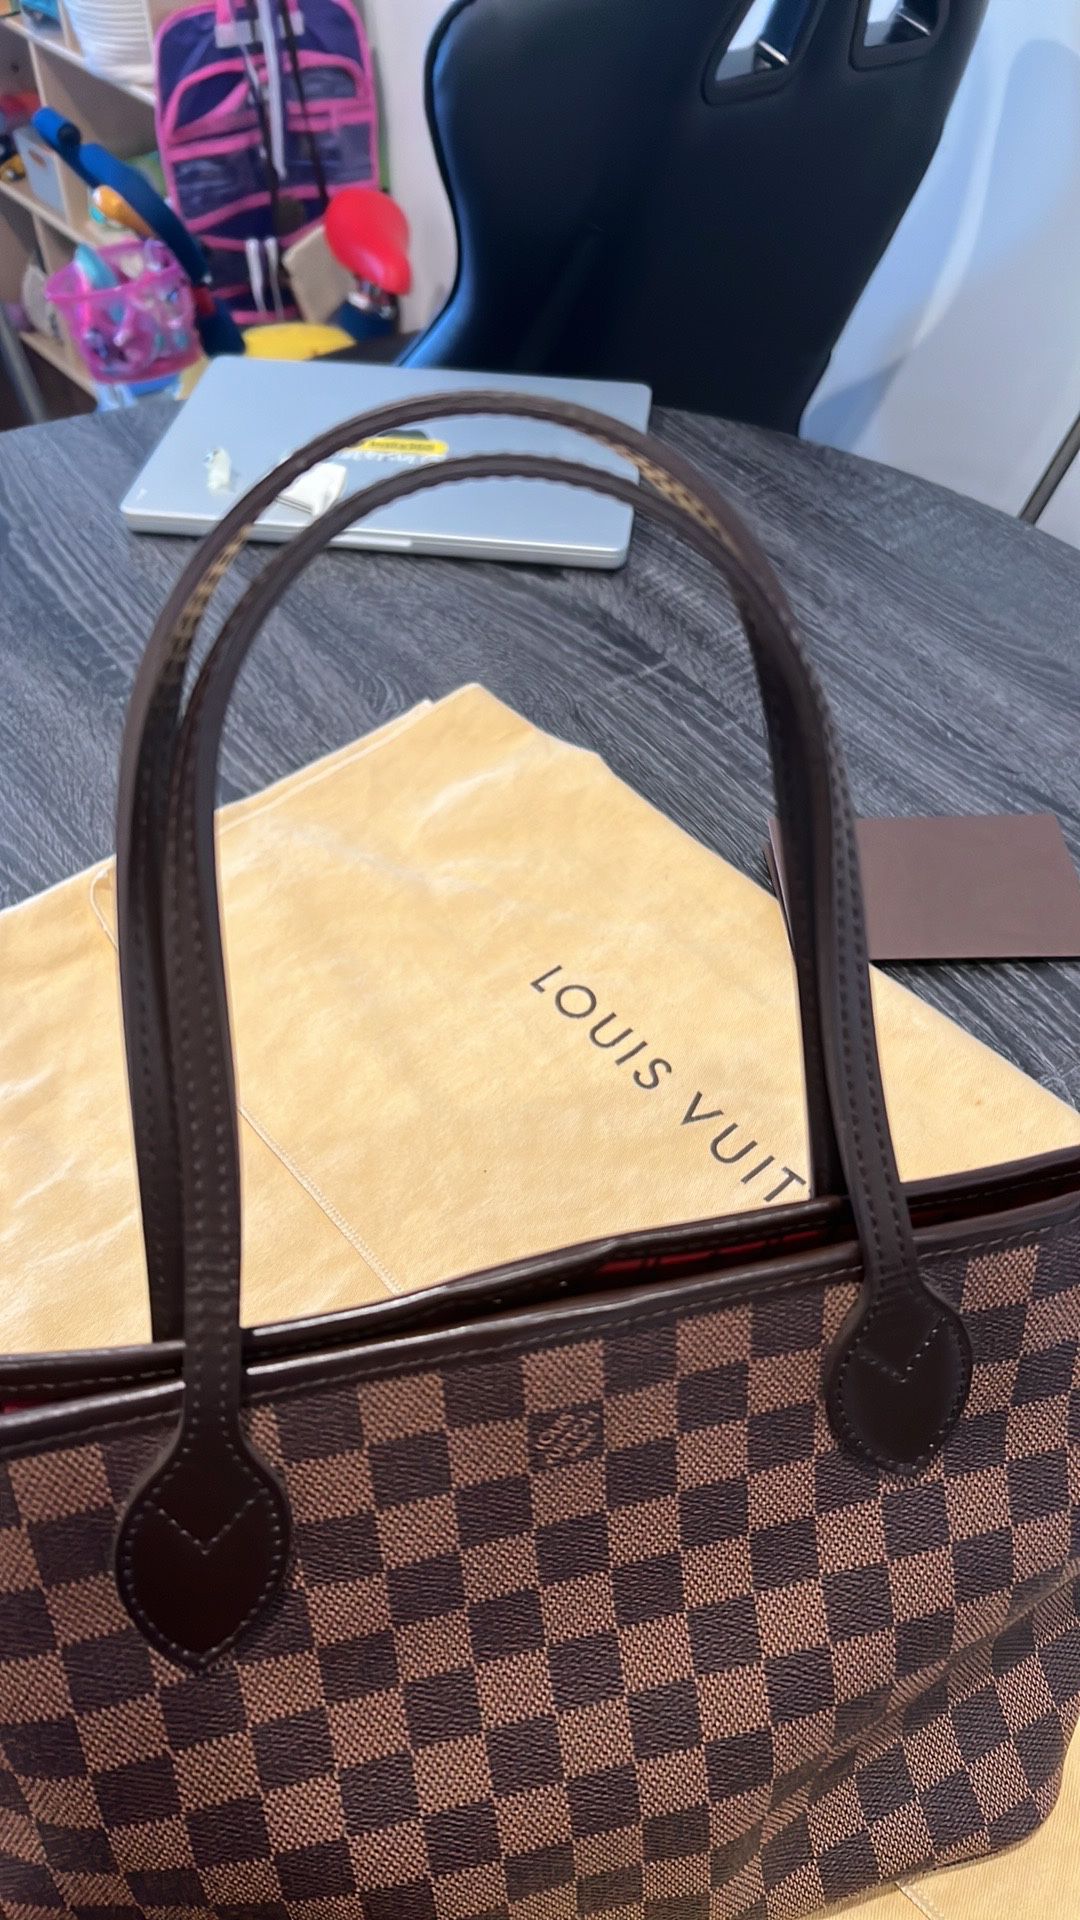 🌟🌟MAKE ME AN OFFER!🌟 Authentic Louis Vuitton Neverfull PM